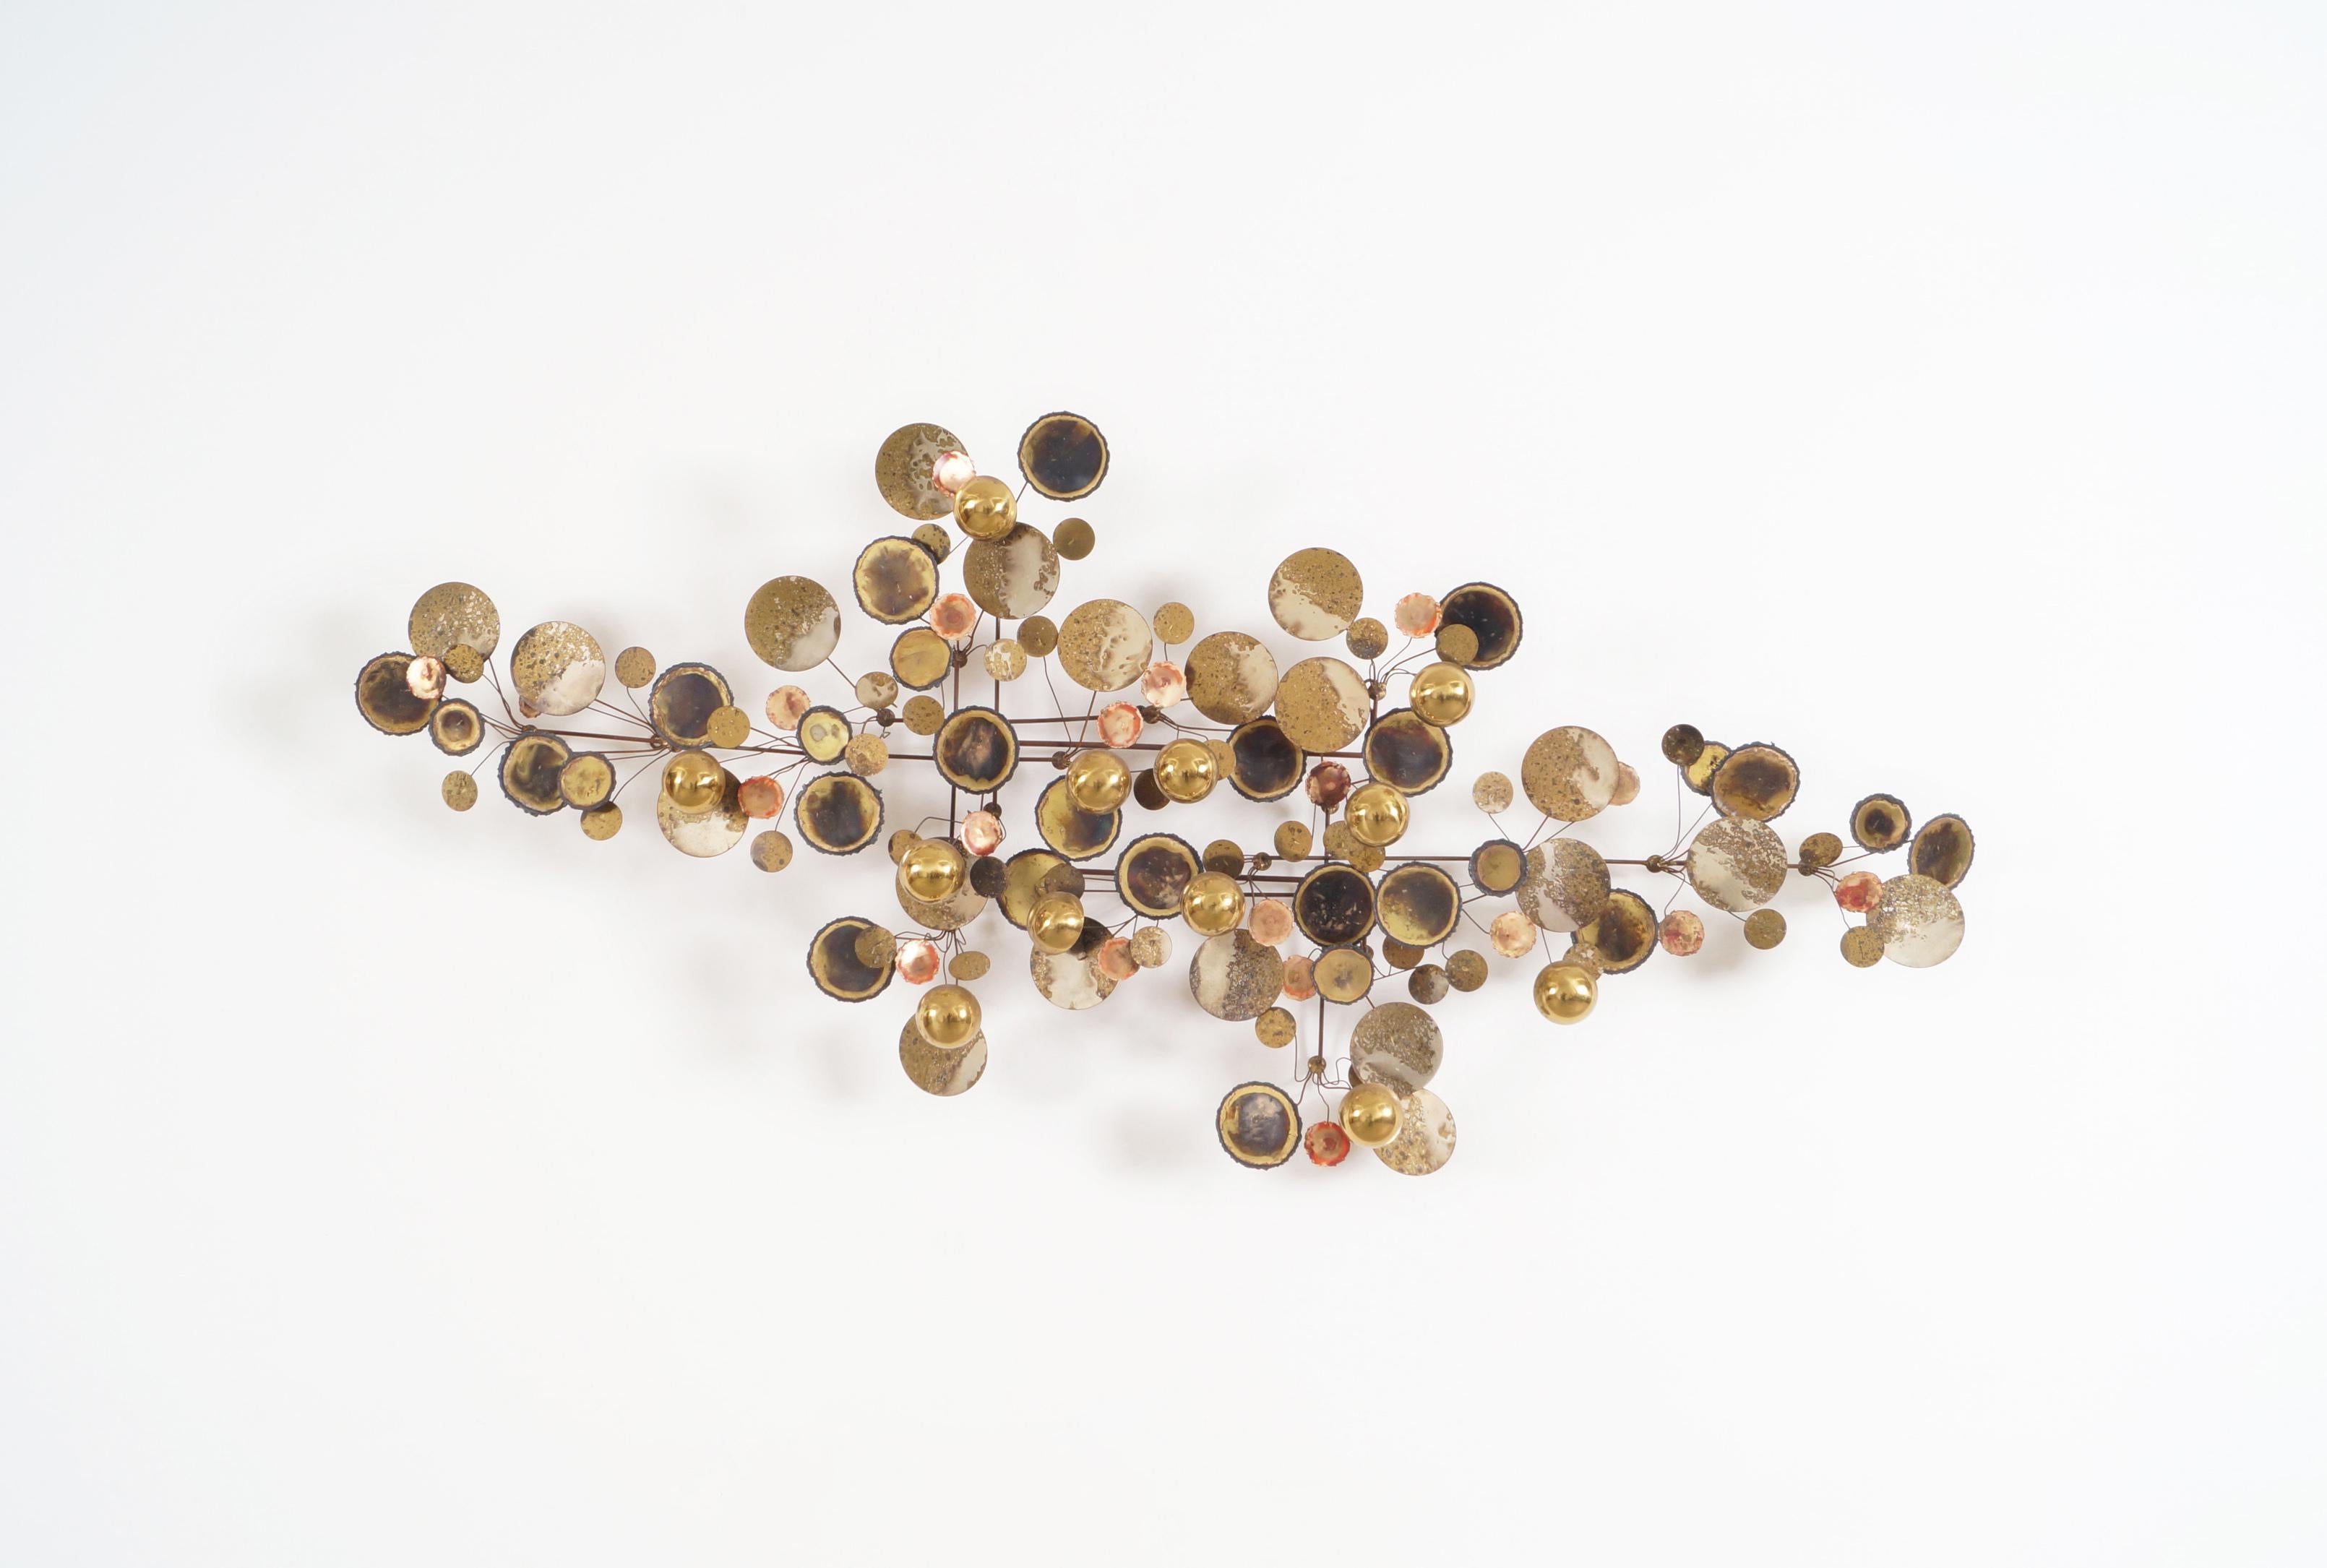 Exceptional vintage brass “Raindrops” wall sculpture designed by Curtis Jere in the United States, circa 1970s. This piece is undoubtedly worthy of any museum since its design and construction materials attract the attention of any spectator,